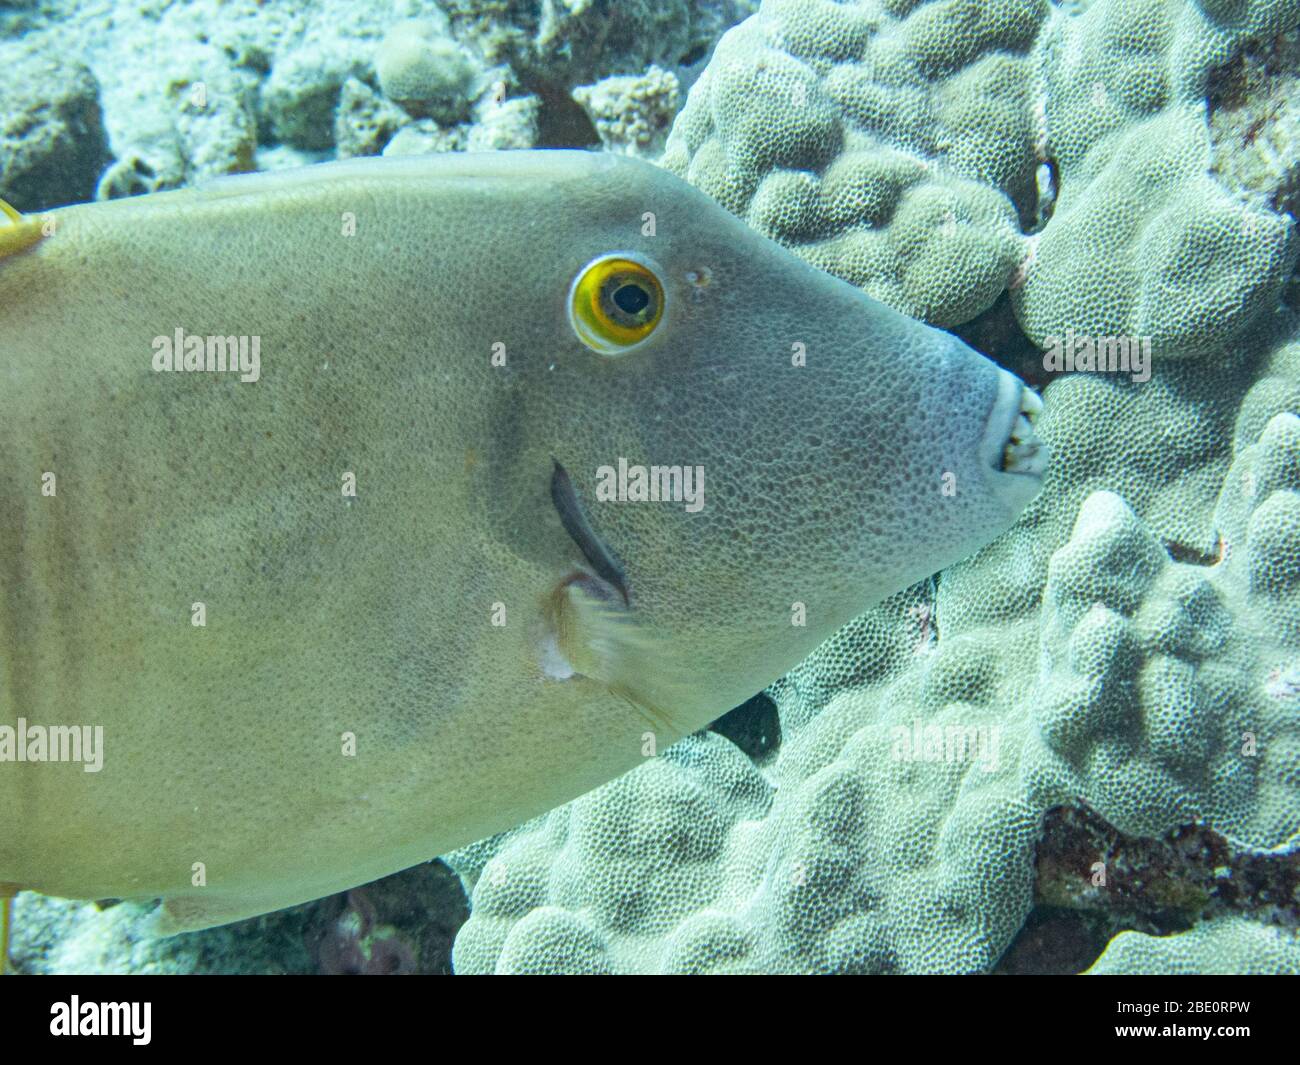 Barred Filefish with yellow eye at Puako Dive site on the Big Island of Hawaii. Stock Photo